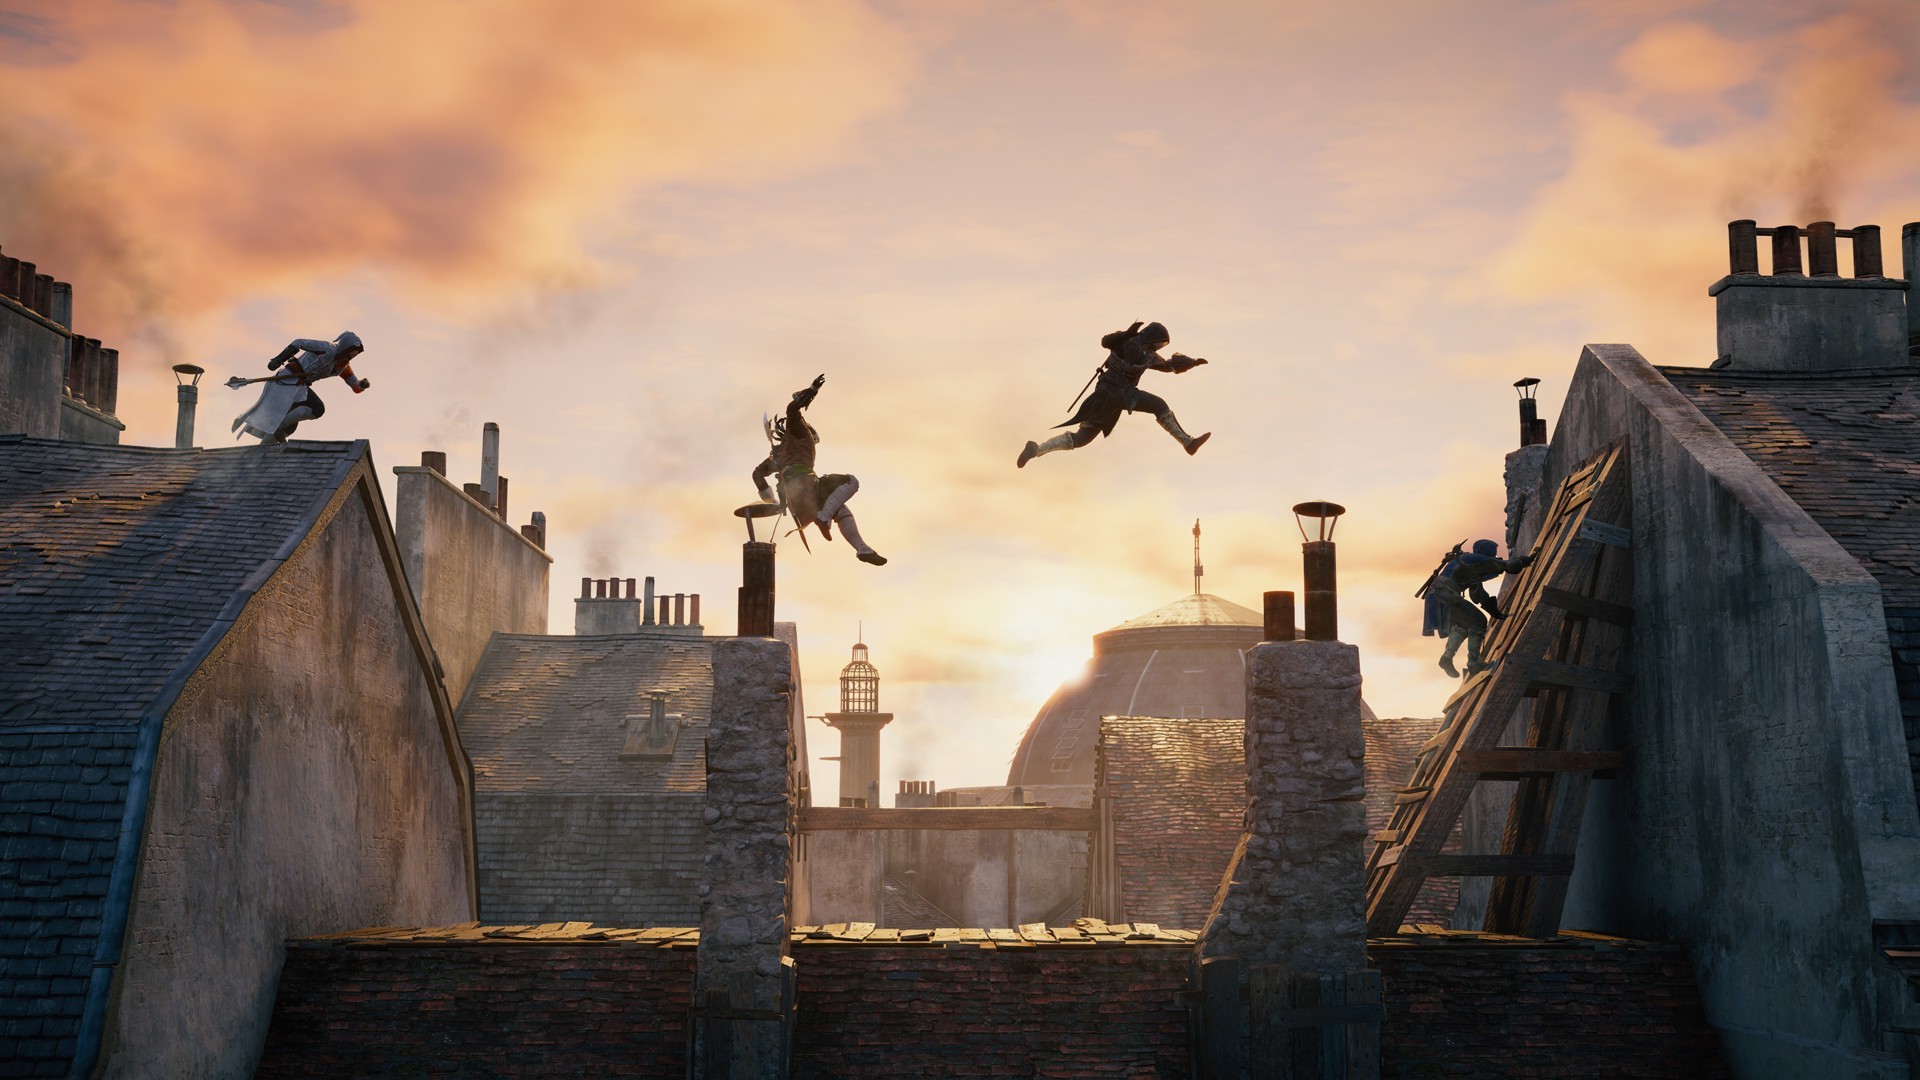 Assassins Creed, Video Games, Rooftops, Parkour, Sequence Photography Wallpaper